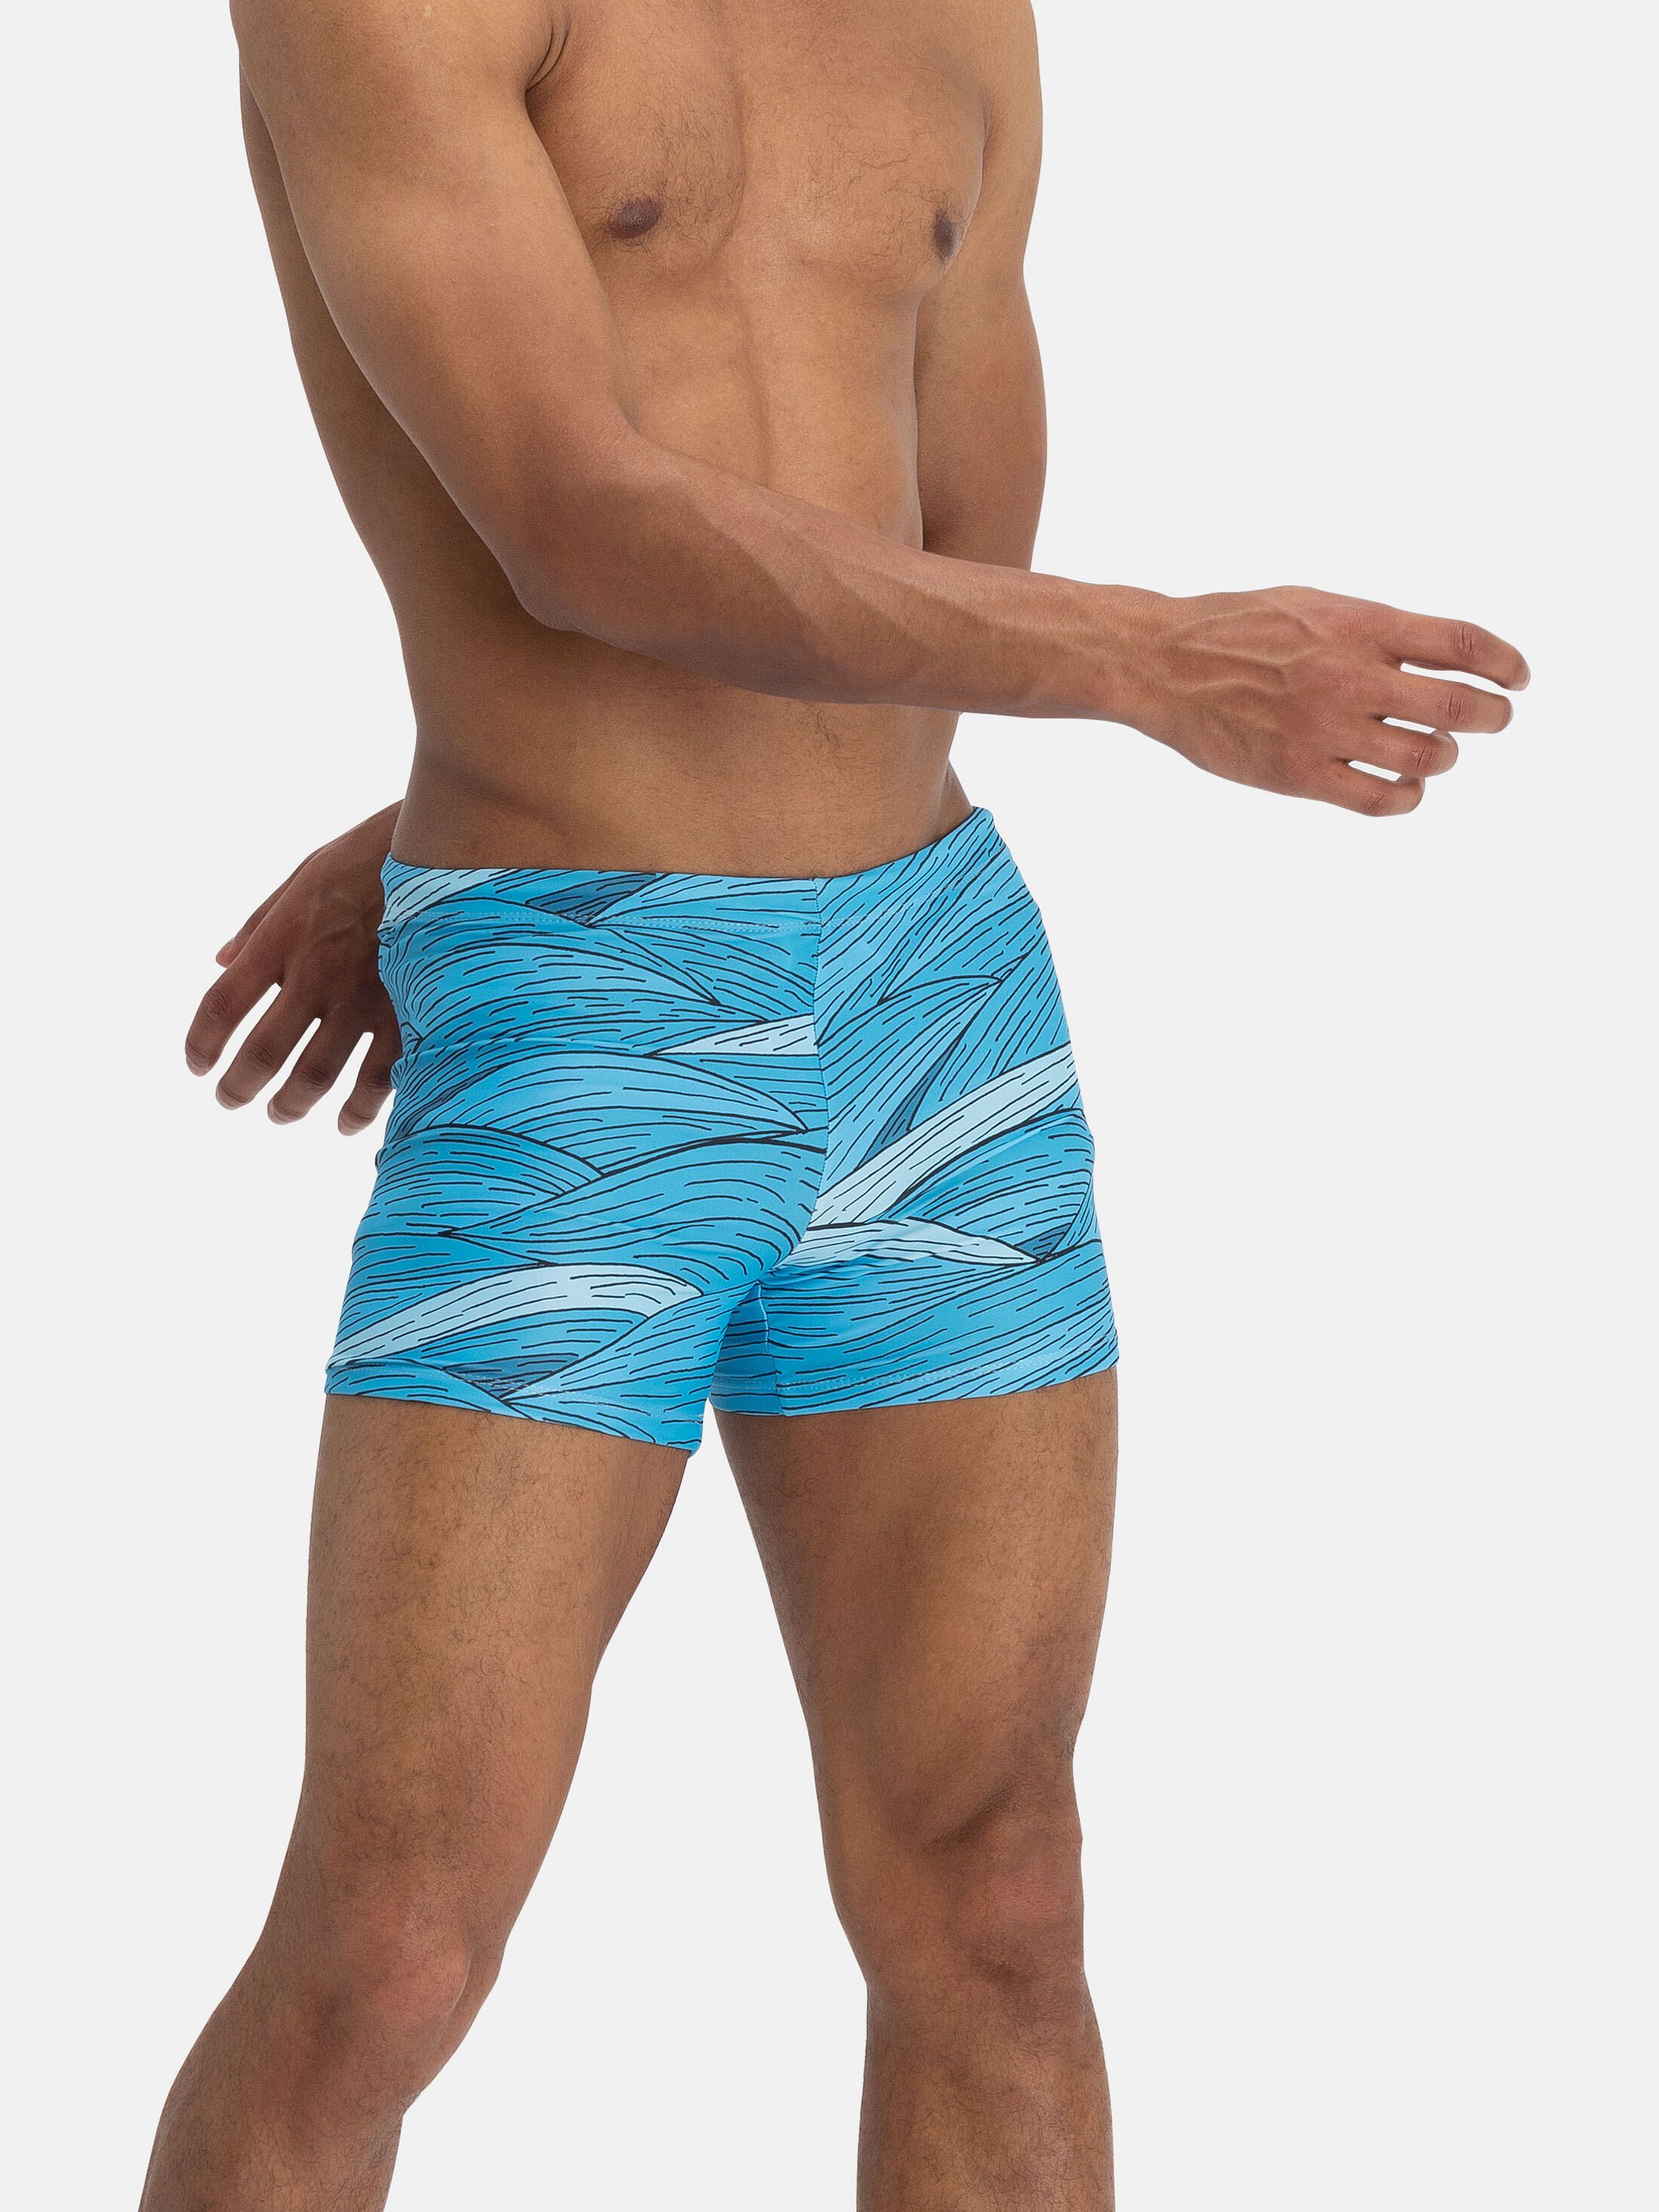 swimming trunks with your design